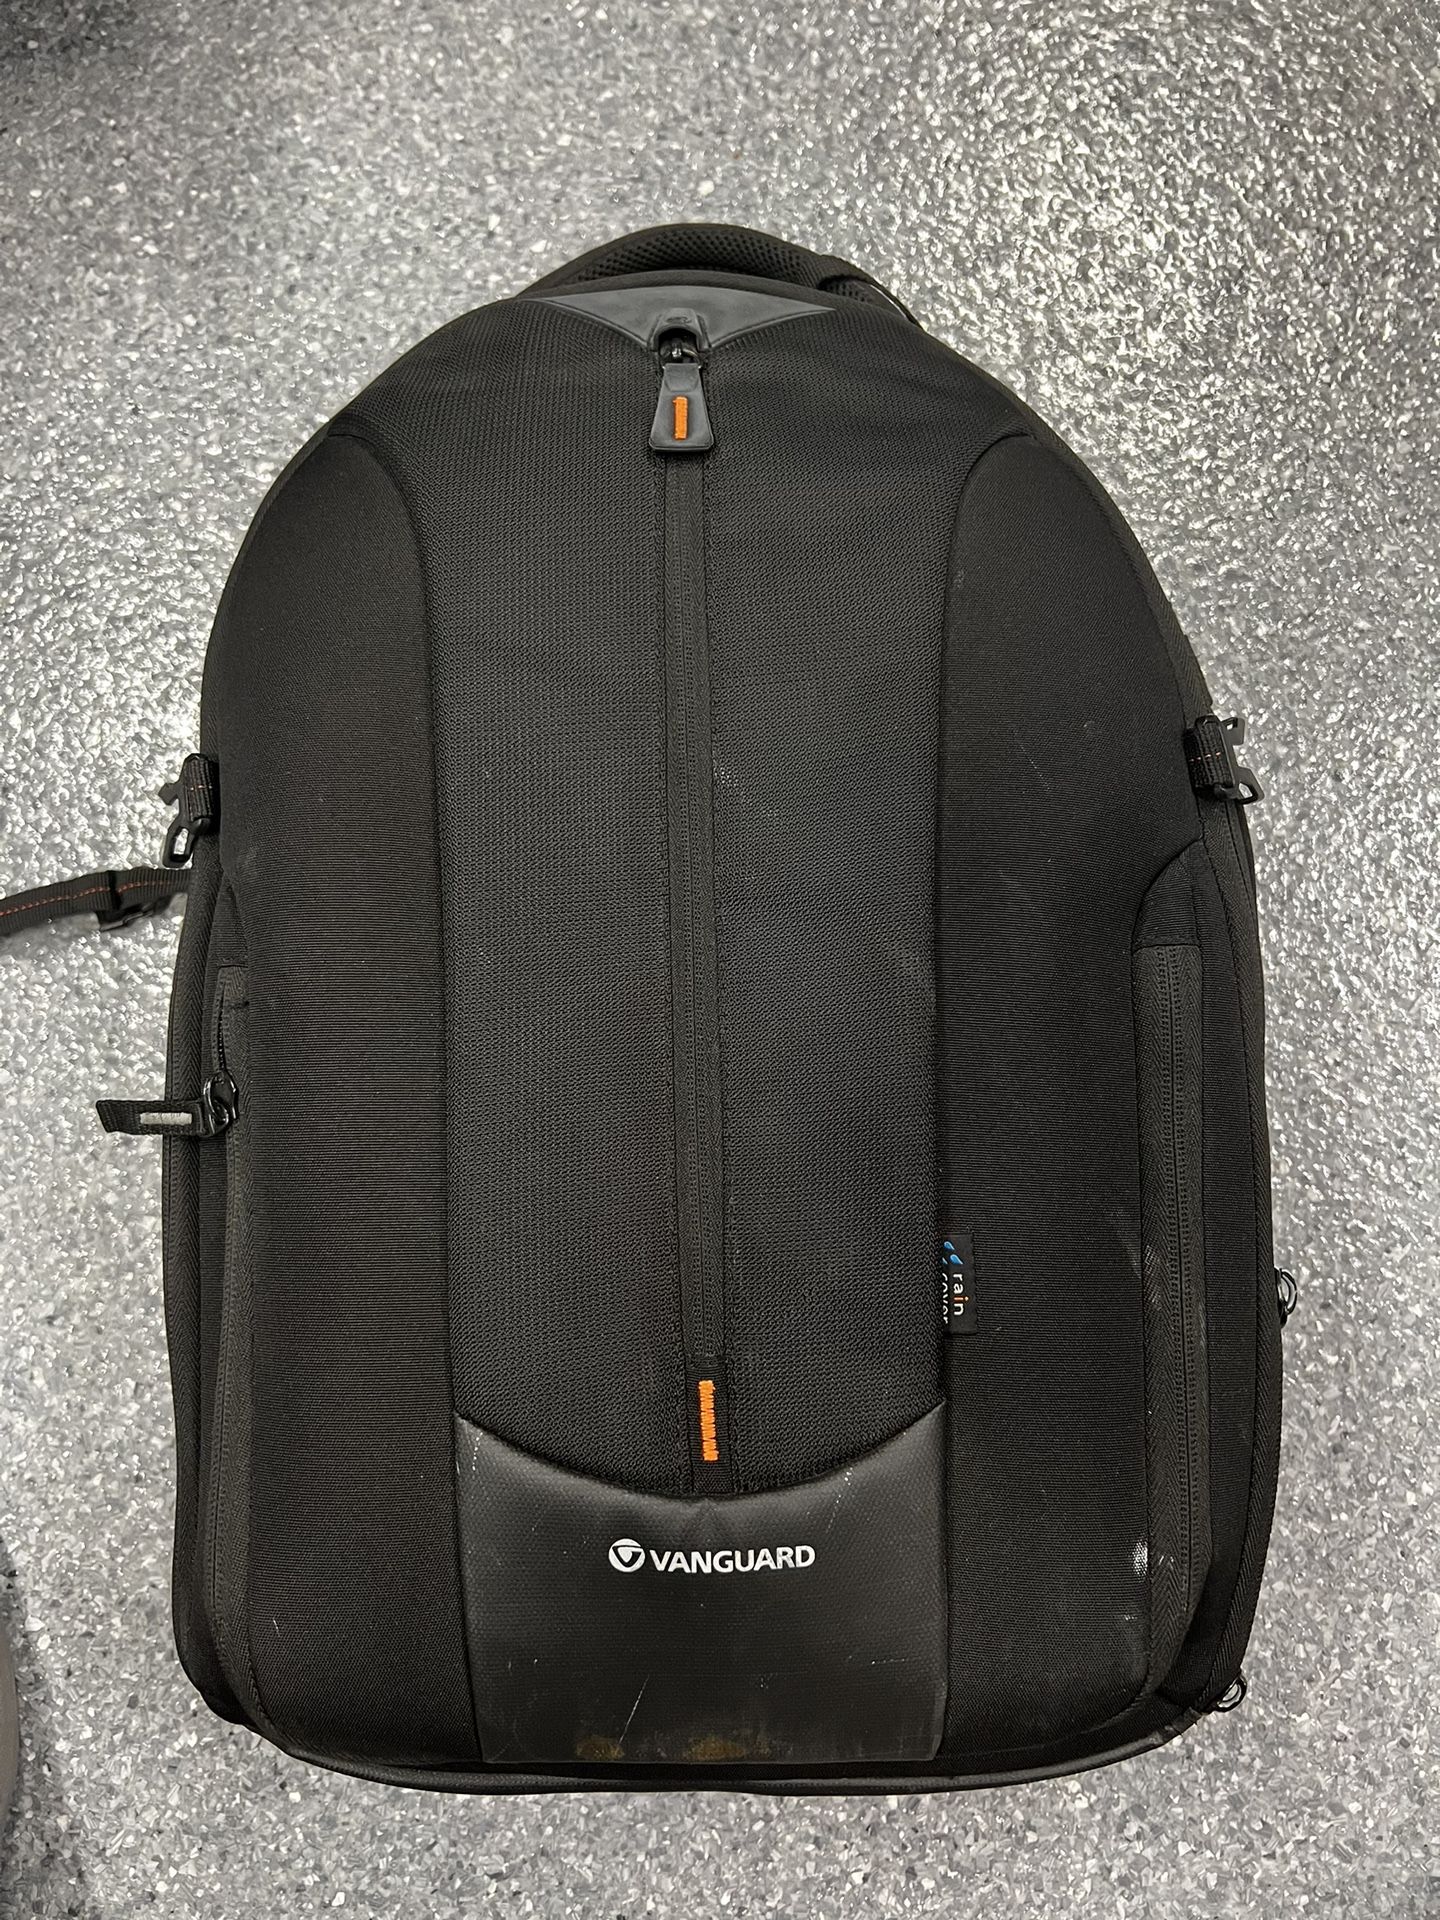 Backpack Camera Equipment Or drone 